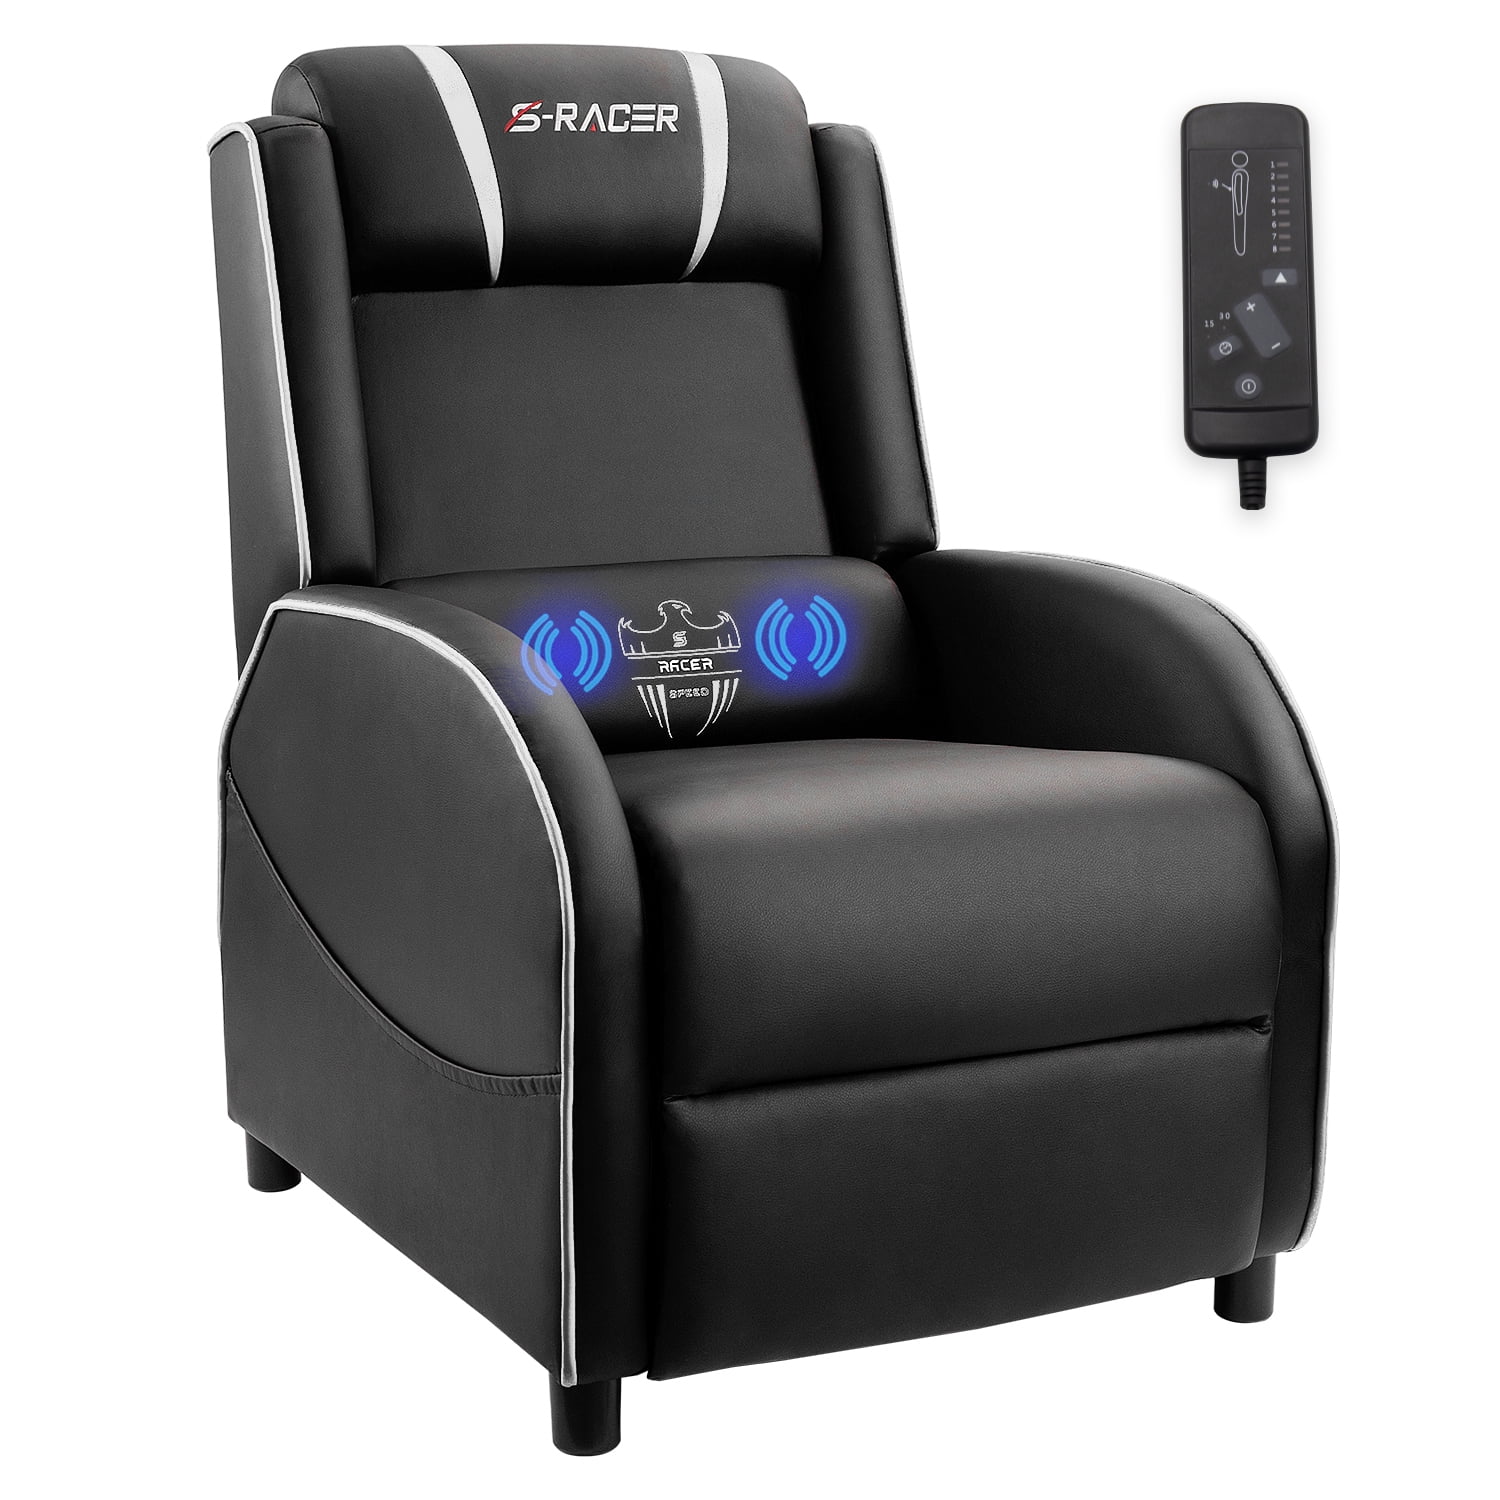 Single Adjustable Sofa Club Recliner Chair Filled with Thicker Sponge PU Leather Sofa Lounge with Adjustable Footrest and Back for Gaming Working Watching Movies Relaxing Single Sofa Recliner green